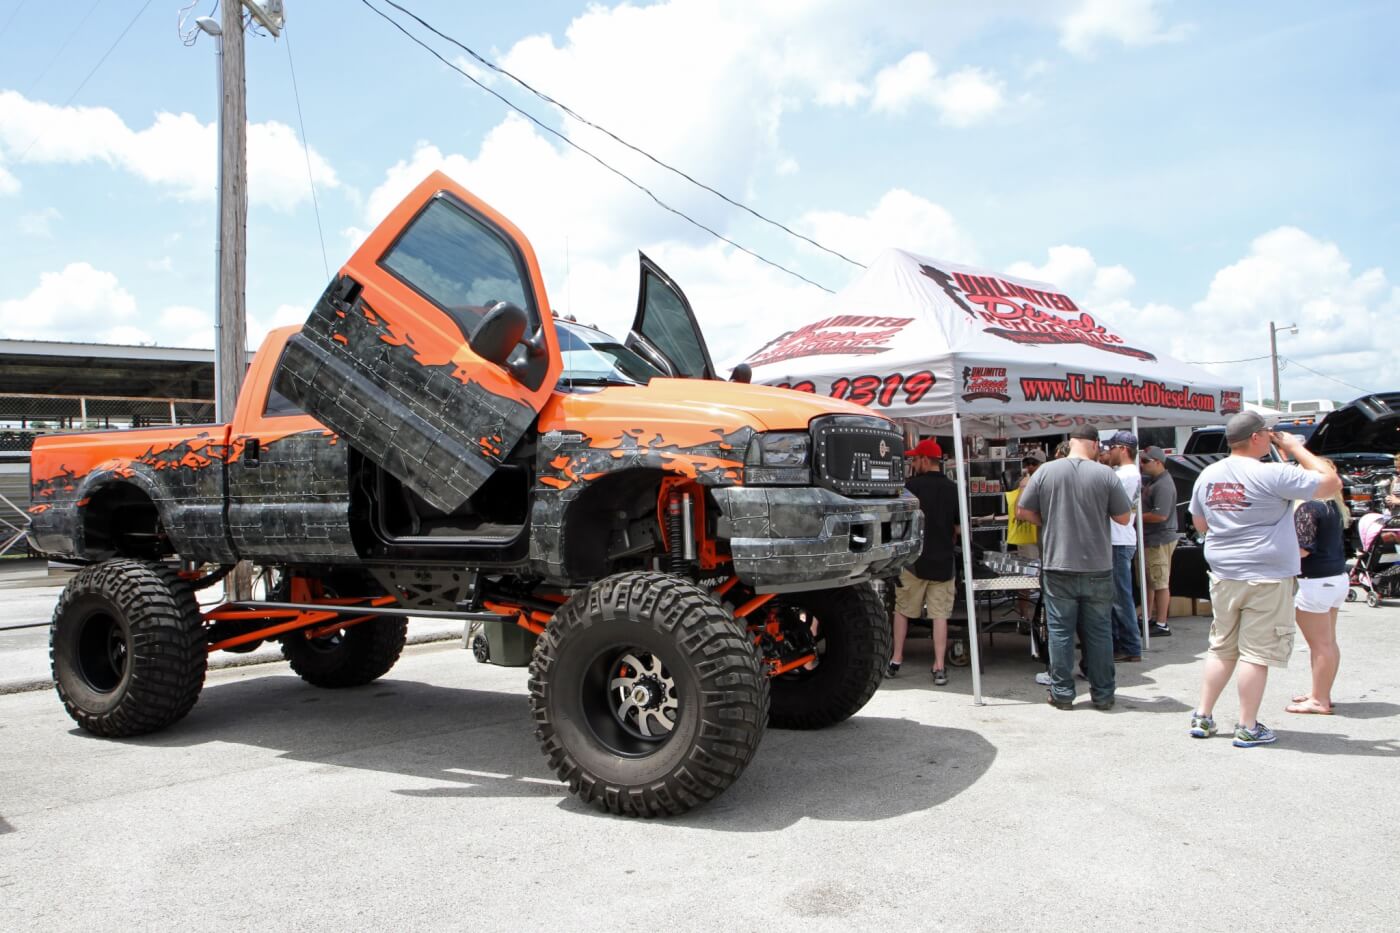 Rickie Locke’s big Ford was on display with its new wrap and painted suspension in the Unlimited Diesel Performance booth at the drag strip and at the park. Locke also entered the Show-N-Shine and took home the Best of Show honors in the field of over 300 trucks.